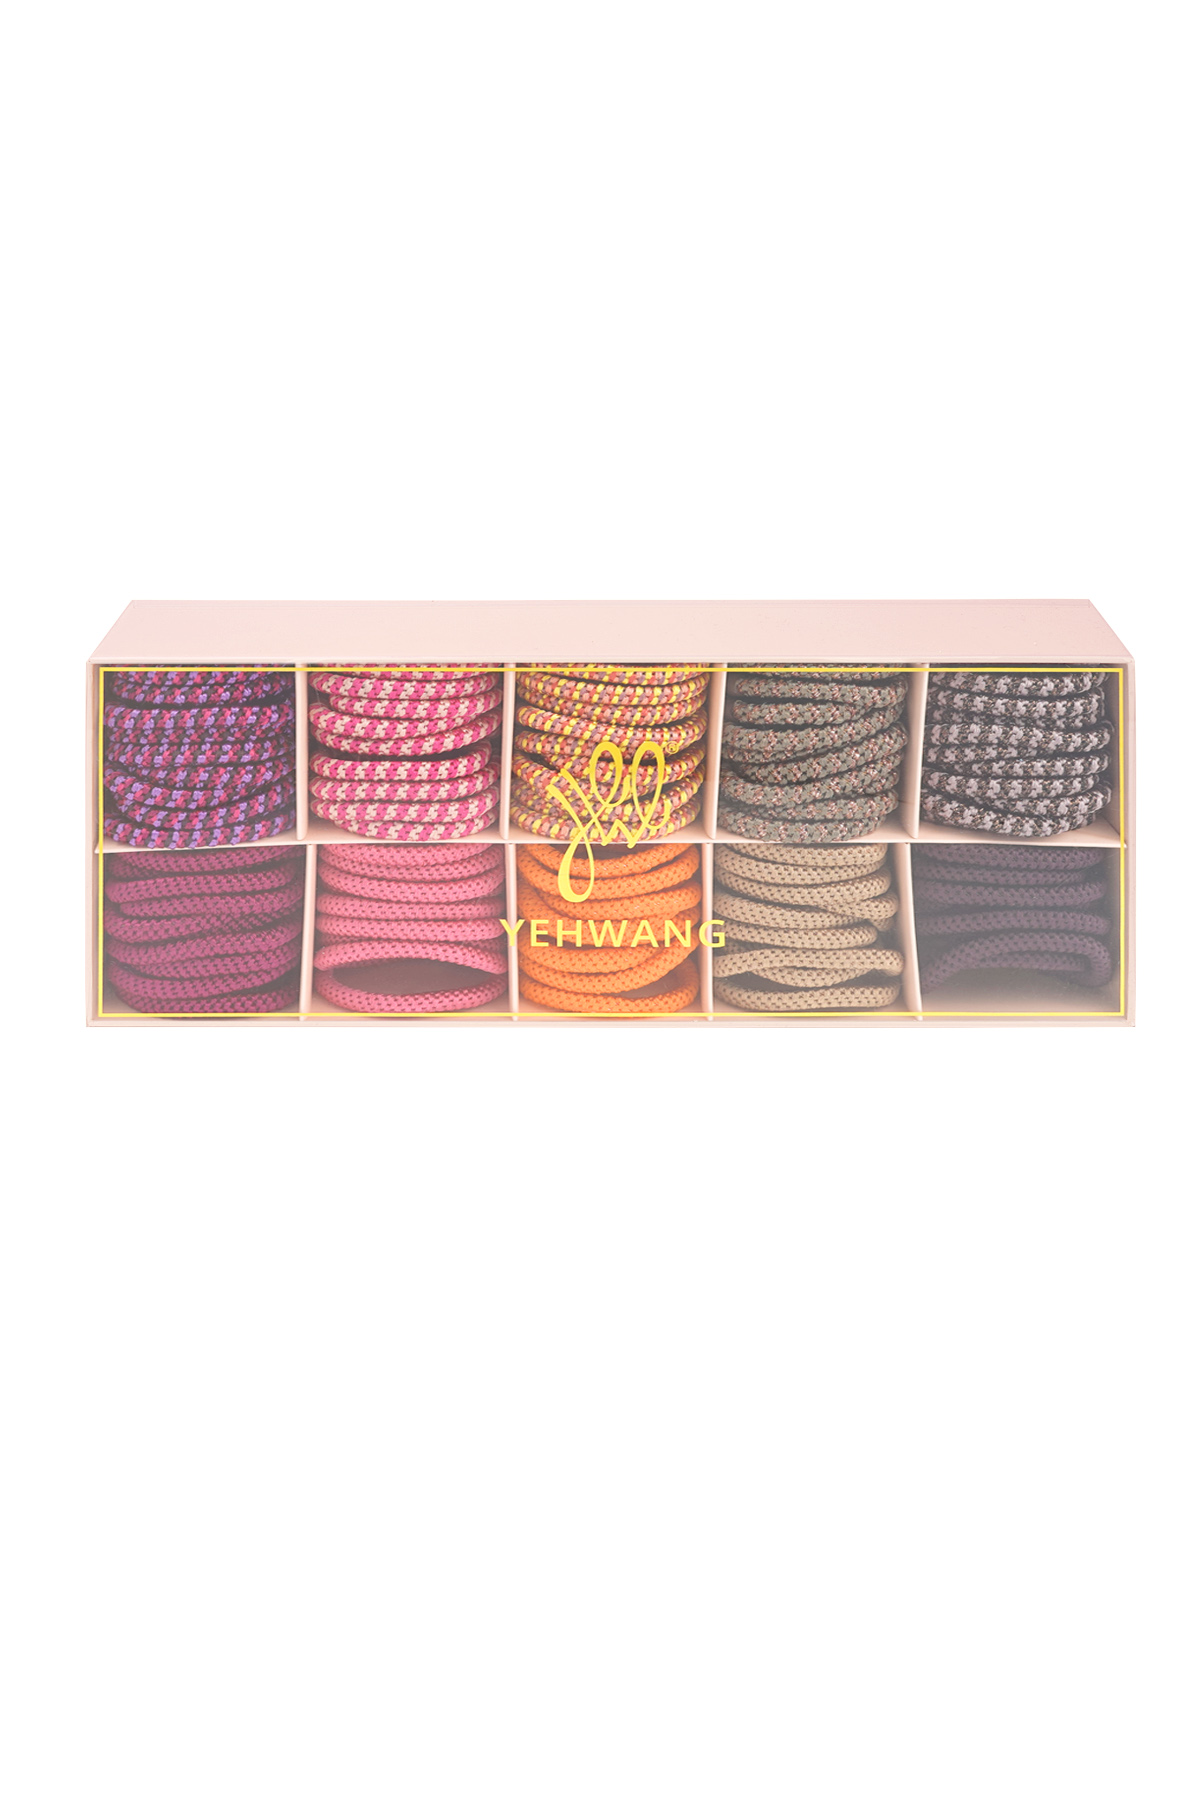 Hair elastic bracelets box bright and basic - multi Picture2